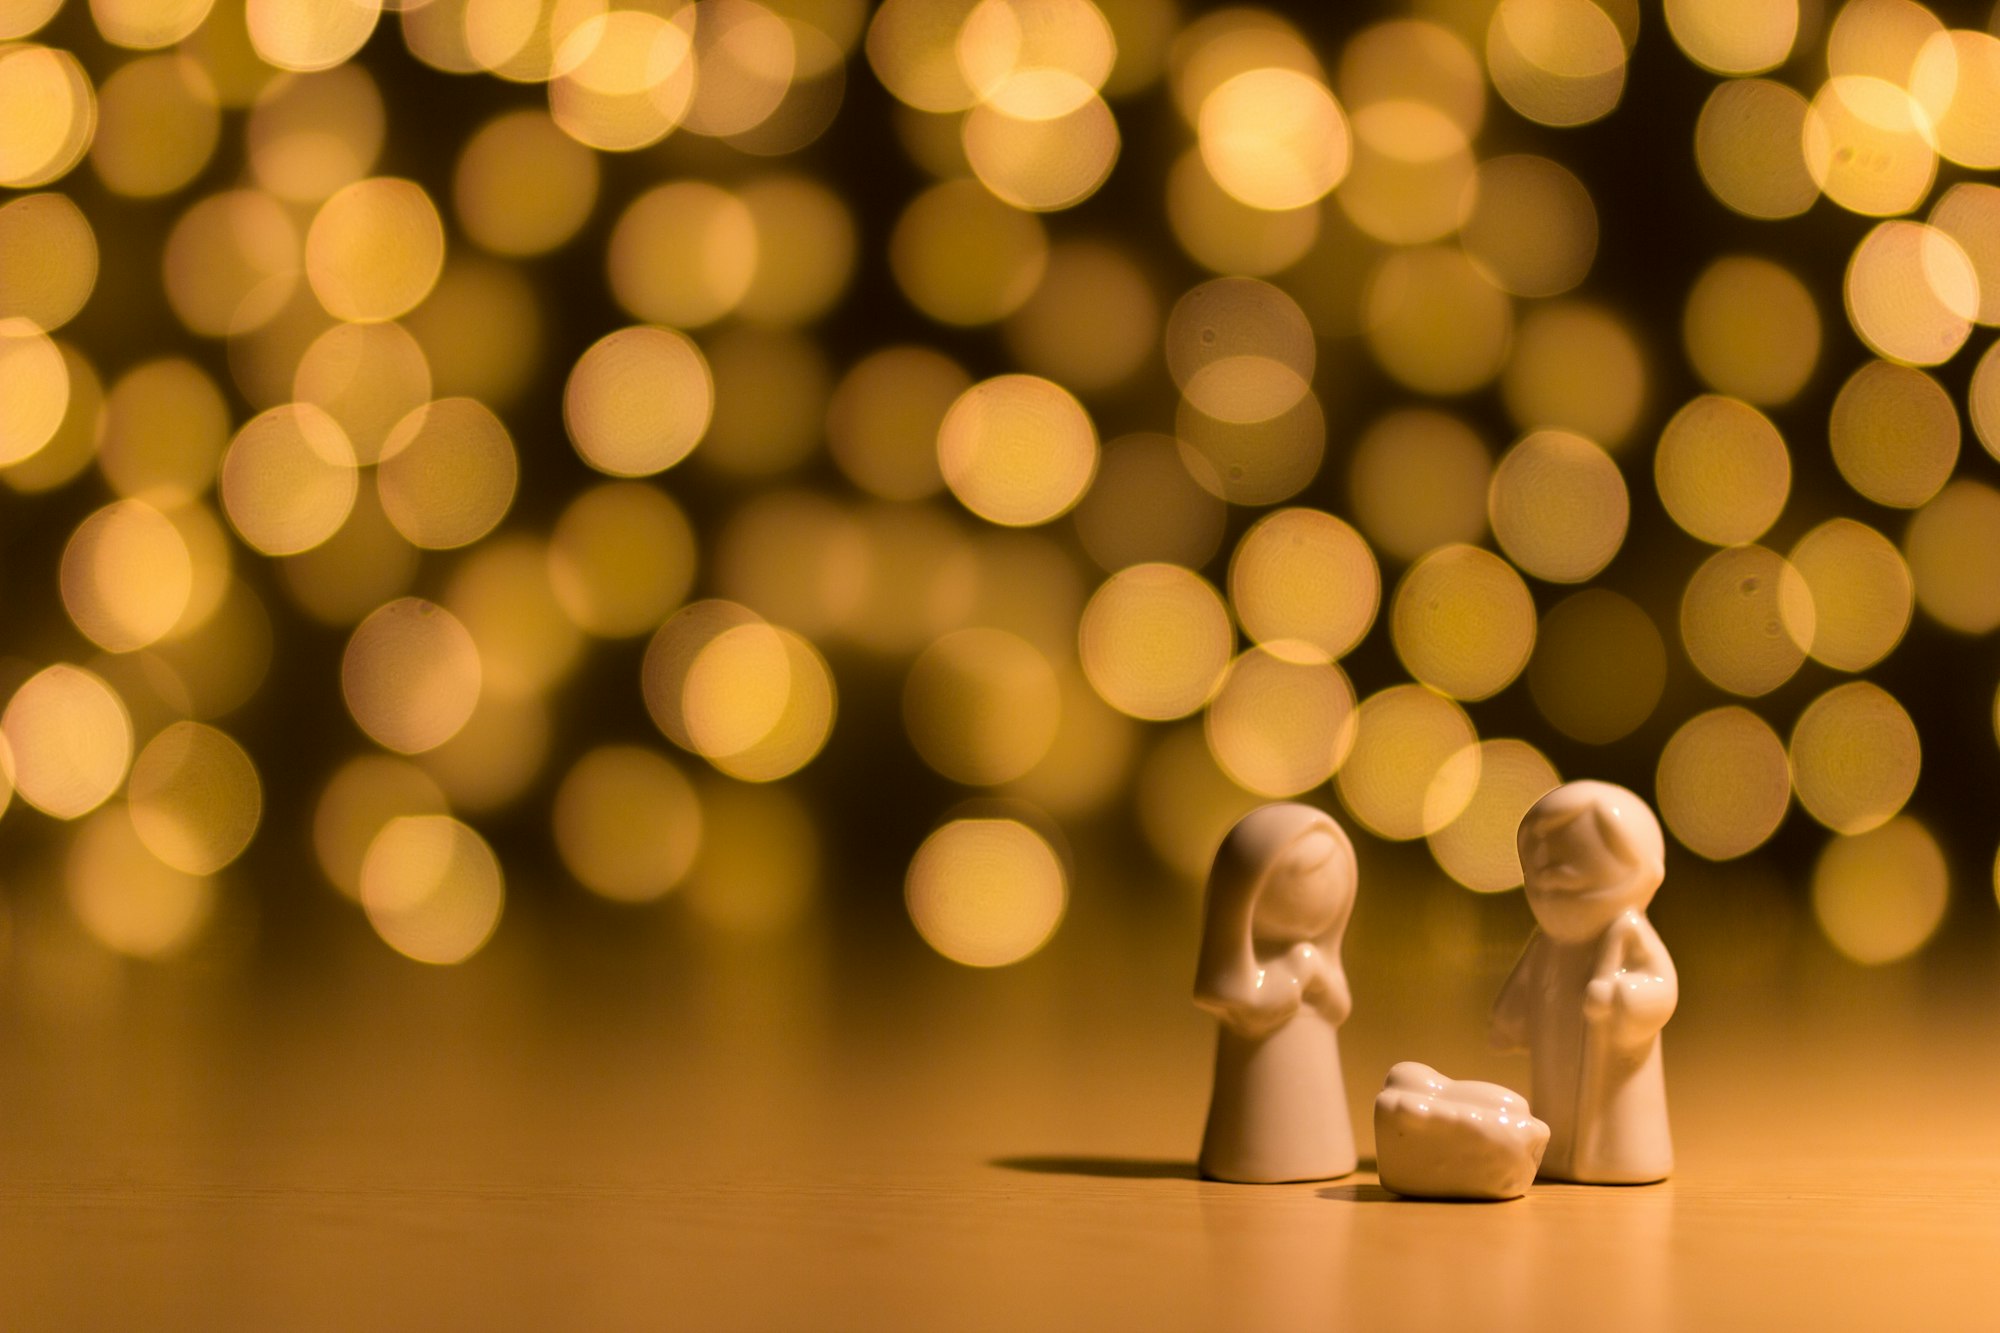 I took this shot whilst making a short video, inspired by the Gospel accounts of the birth of Jesus.

My friend lent me their beautiful nativity set, some other friends lent me their desk lamps for lighting and it’s amazing what you can achieve with some fairylights, sellotape and depth of field.

Anyways, Merry Christmas. God bless us, everyone.